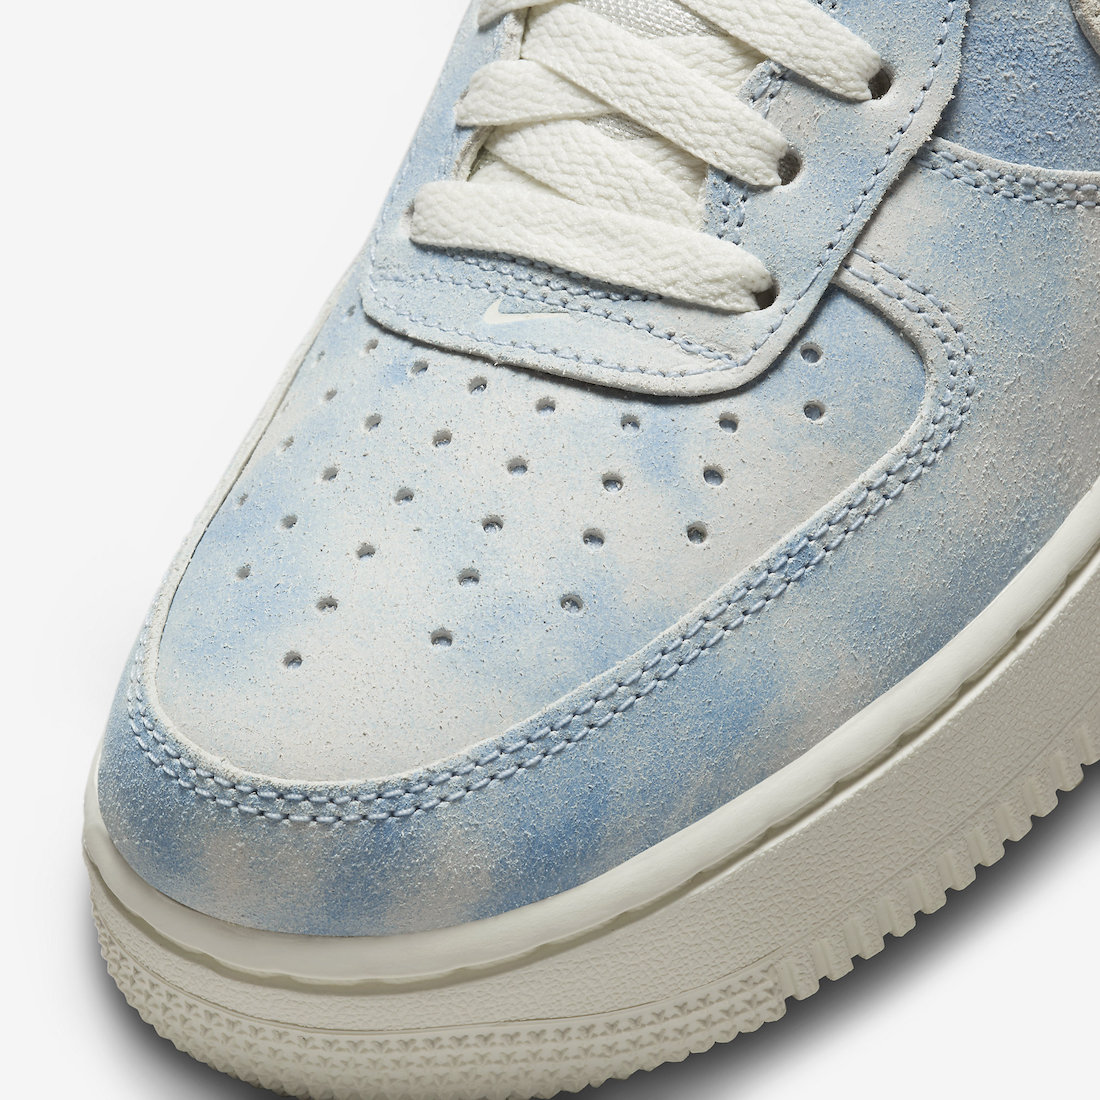 Nike Air Force 1 Low Clouds University Blue Sail FD0883-400 Release Date 